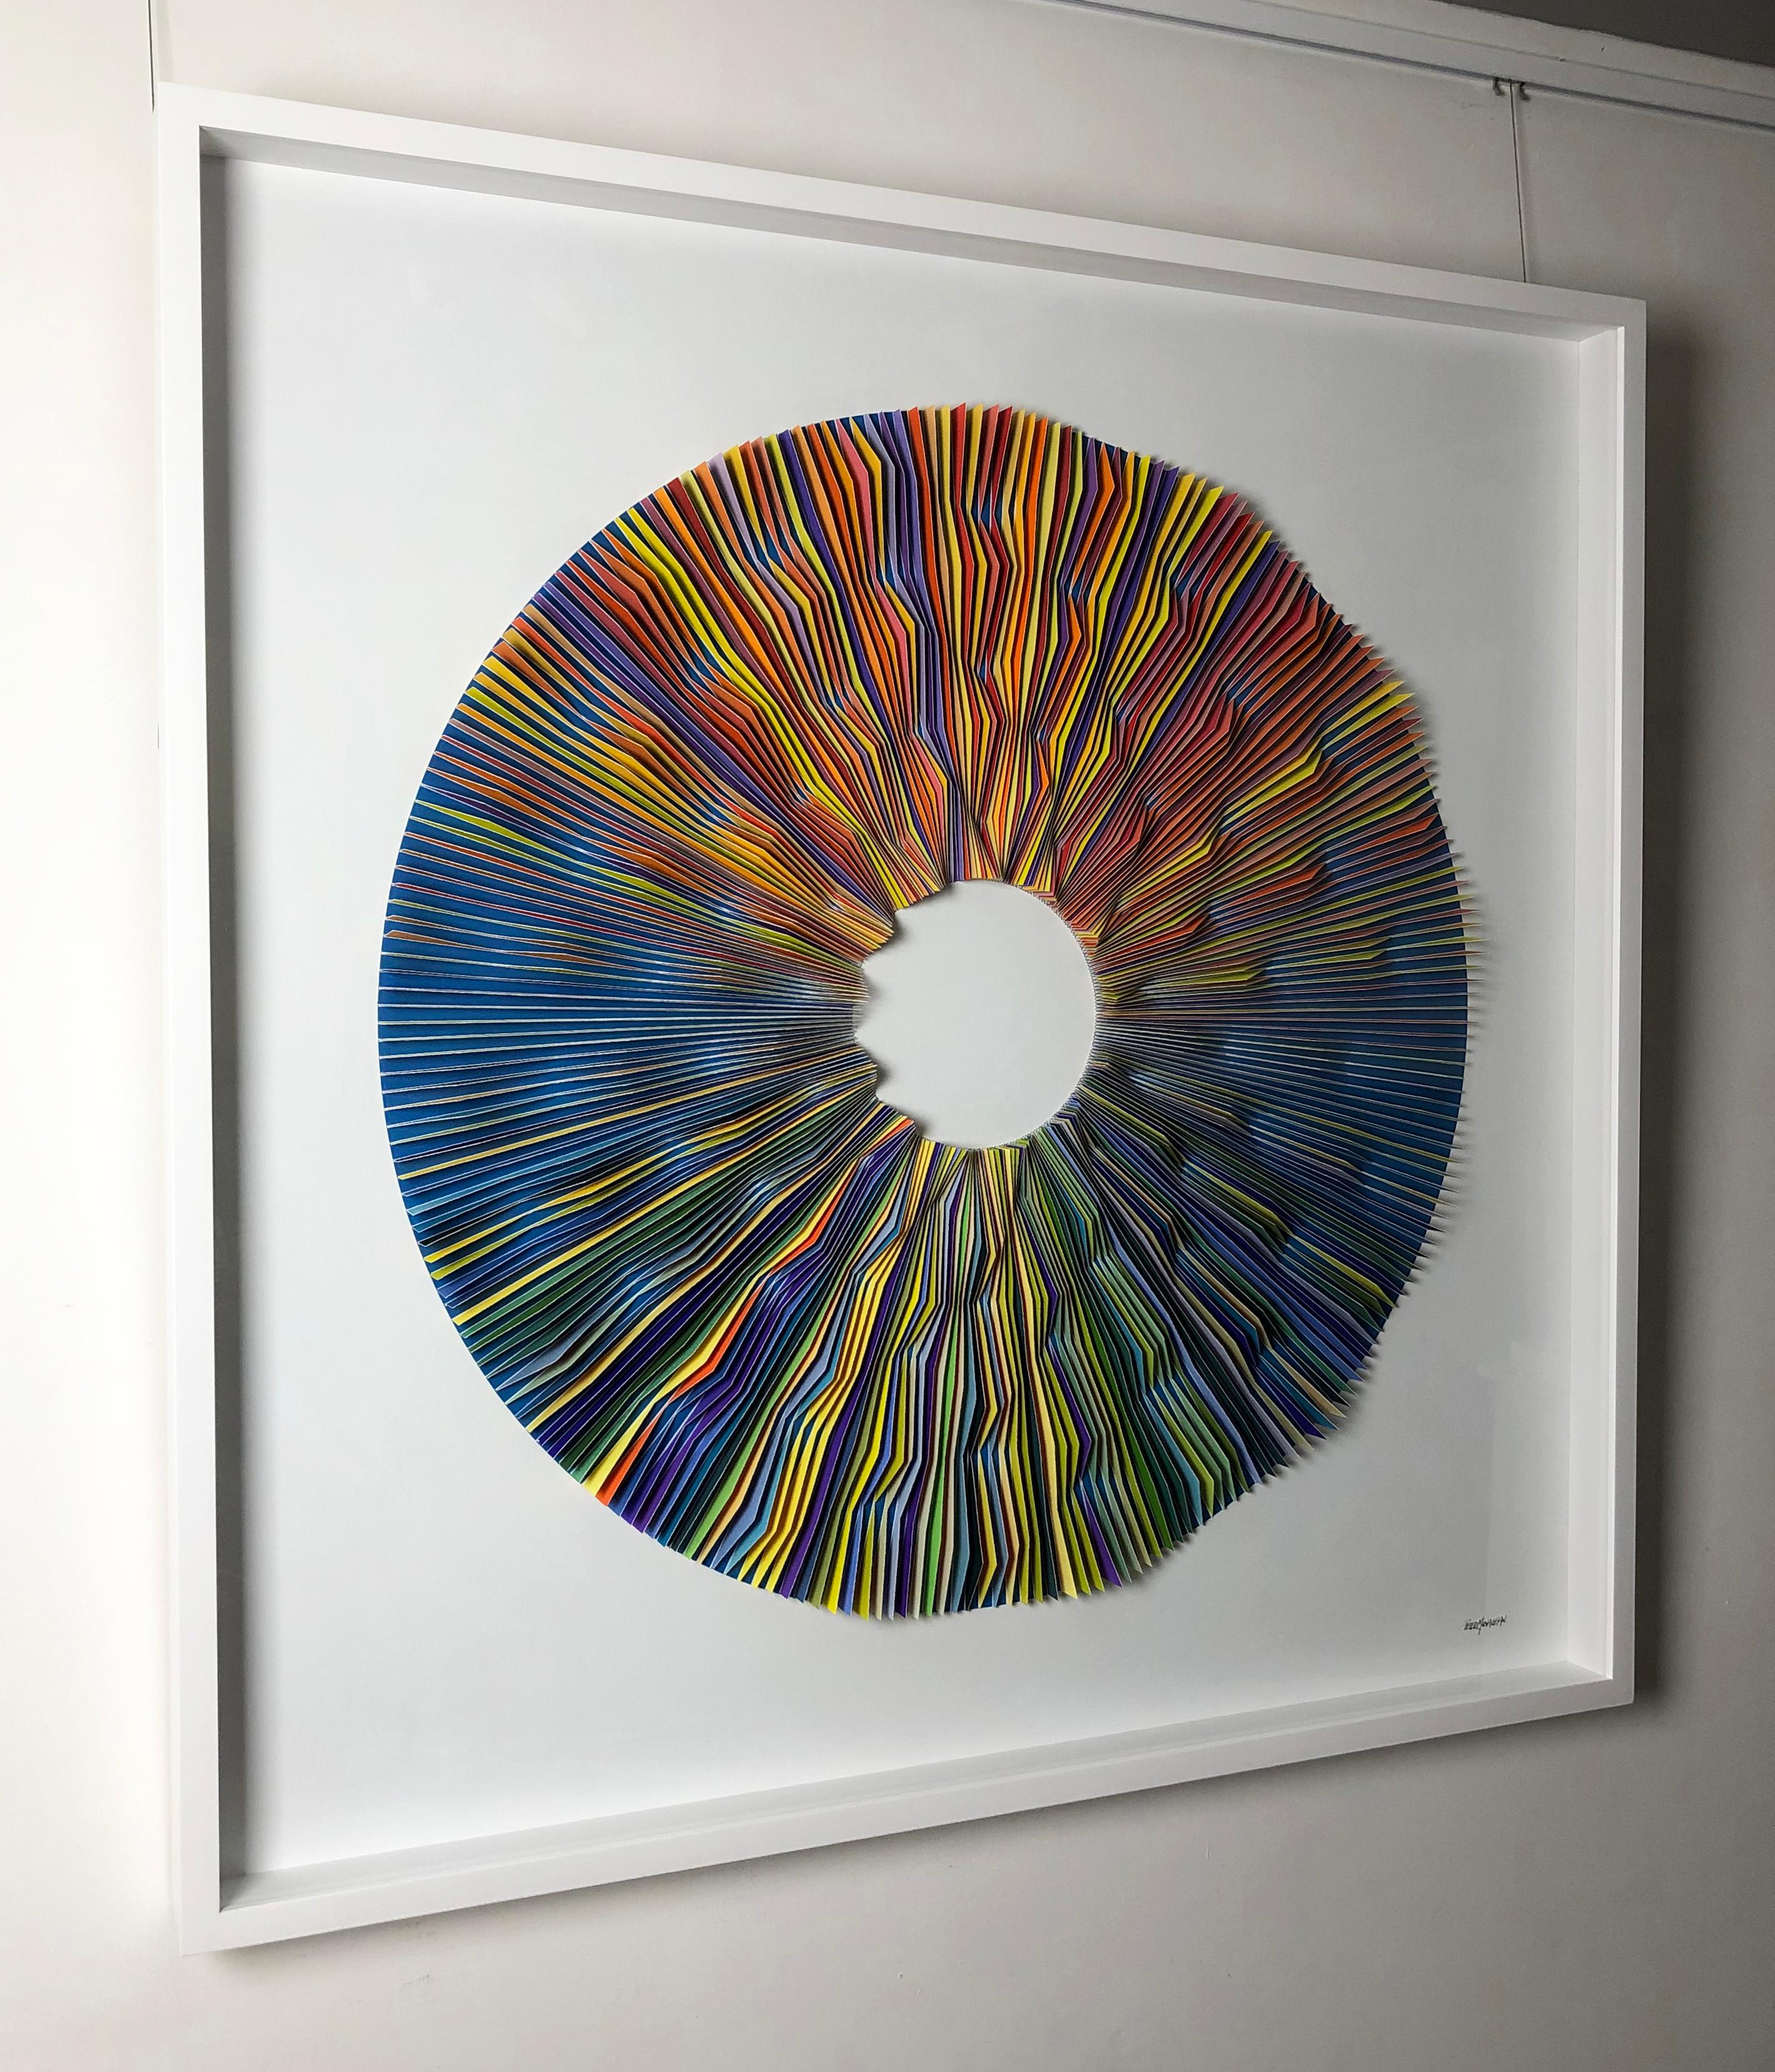 'Radiating Lines Blue' by Peter Monaghan, 113 x 113cm, mixed media, 2019. Signed by the artist at the back.

Peter Monaghan was born in Ireland in 1955 and studied at the National College of Art and Design in the mid 1970s. He then joined Dara